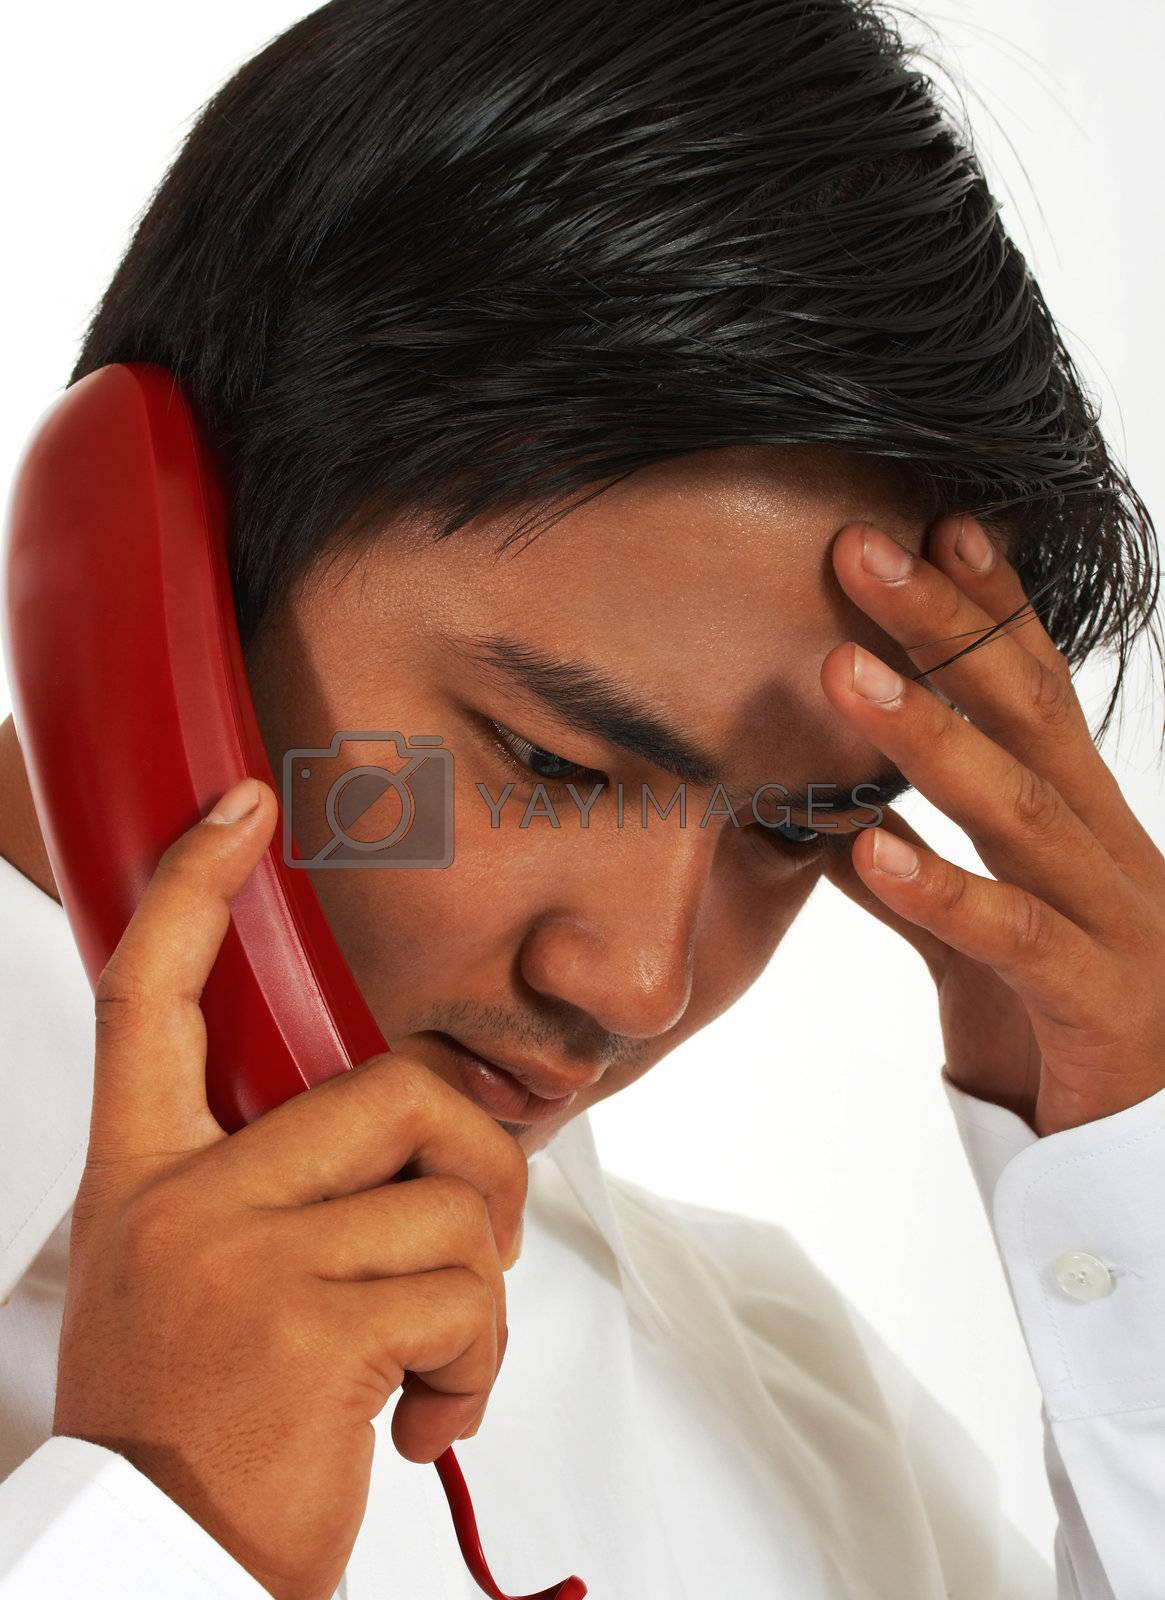 Busy Worker On The Telephone Looking Stressed And Serious